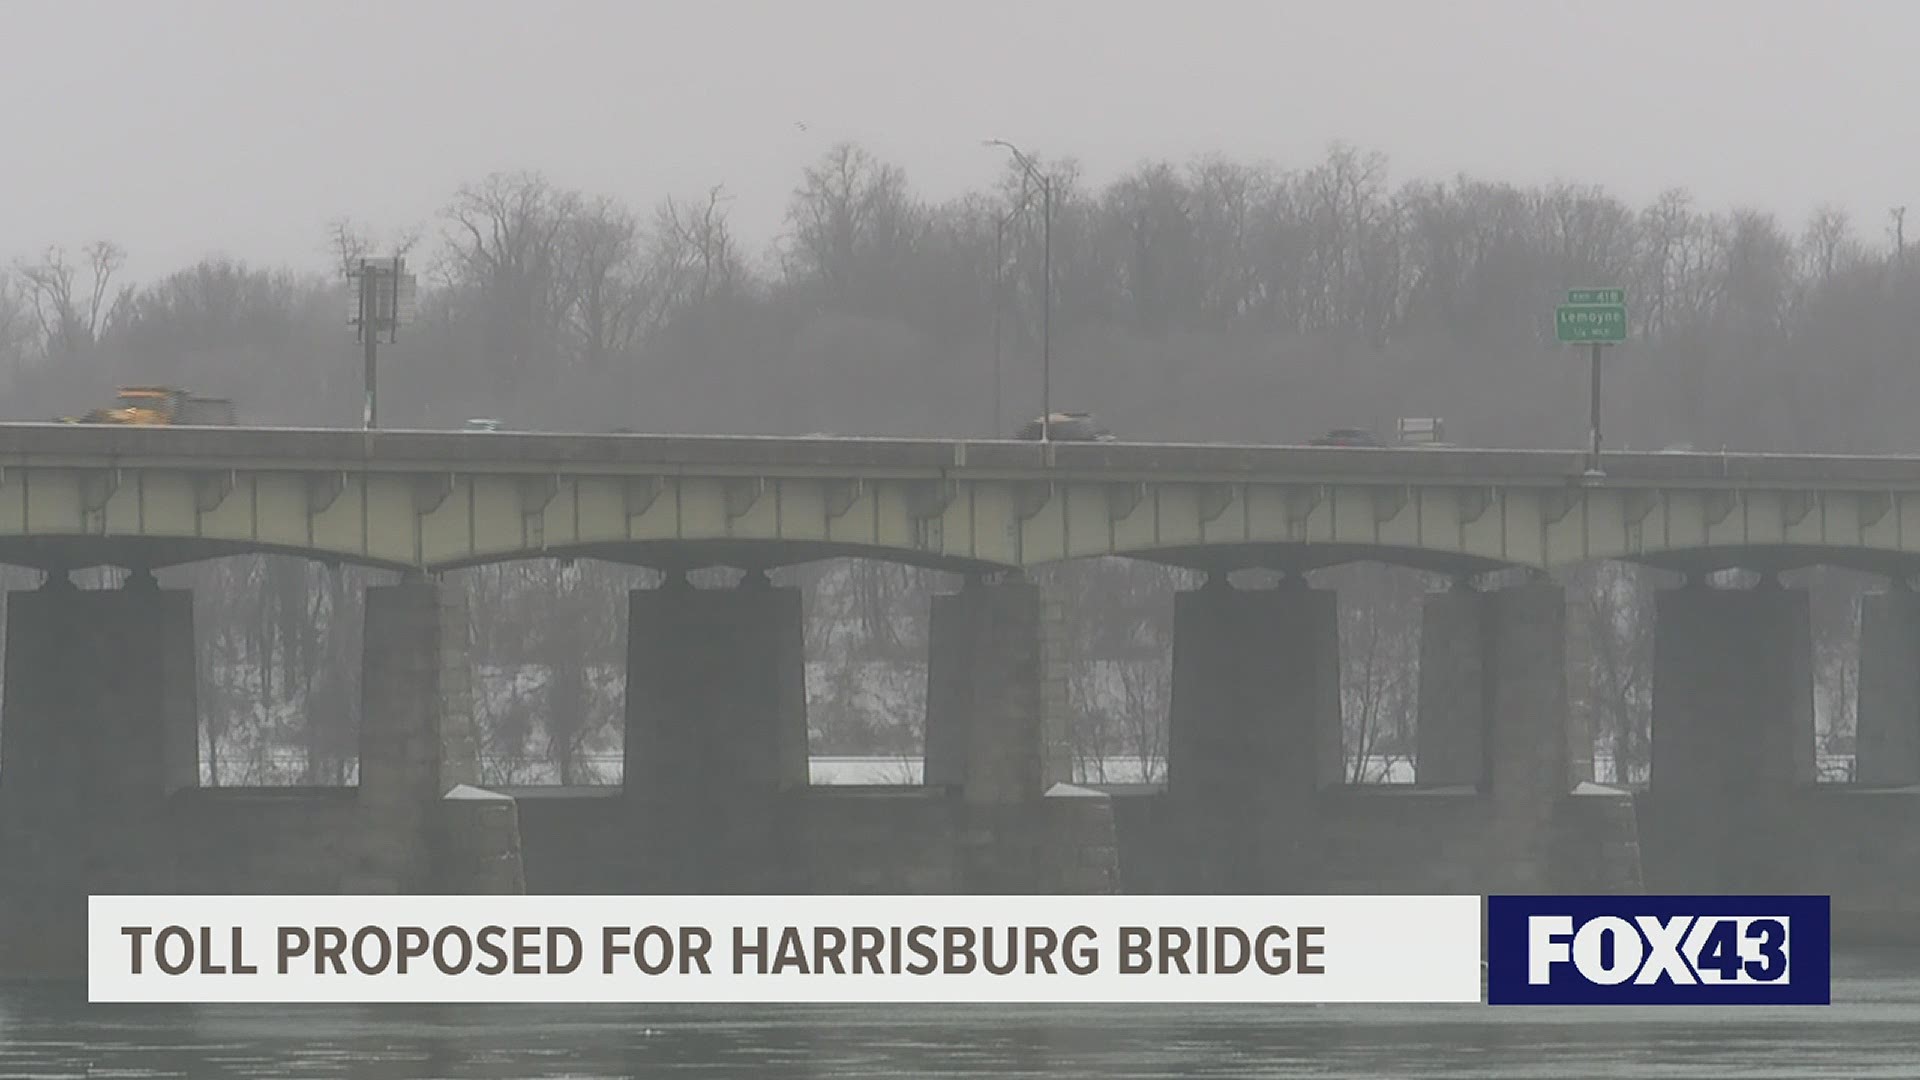 Dauphin County bridge slated for toll-funded renovations